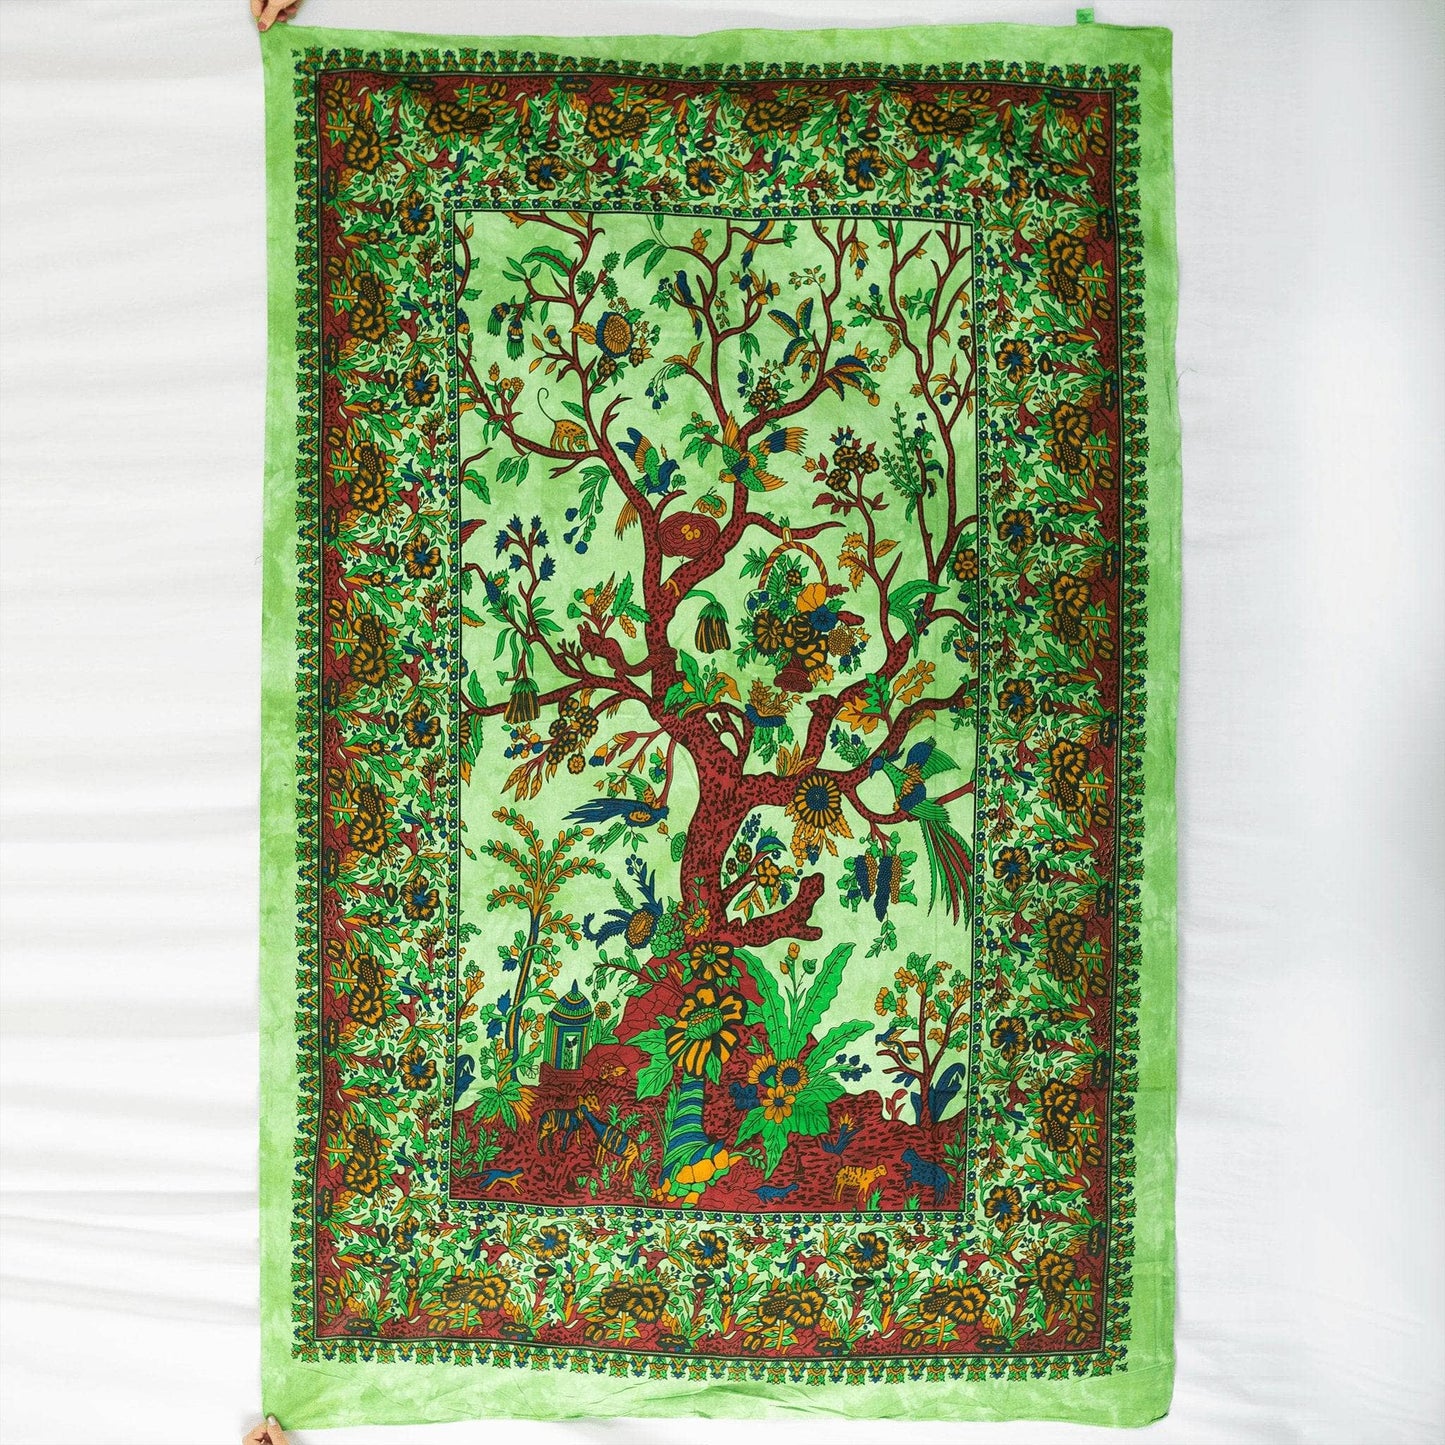 Tranquil tree tapestry hanging in front of a white background. Mainly green and brown with graphic of tree, birds, animals, and flowers.